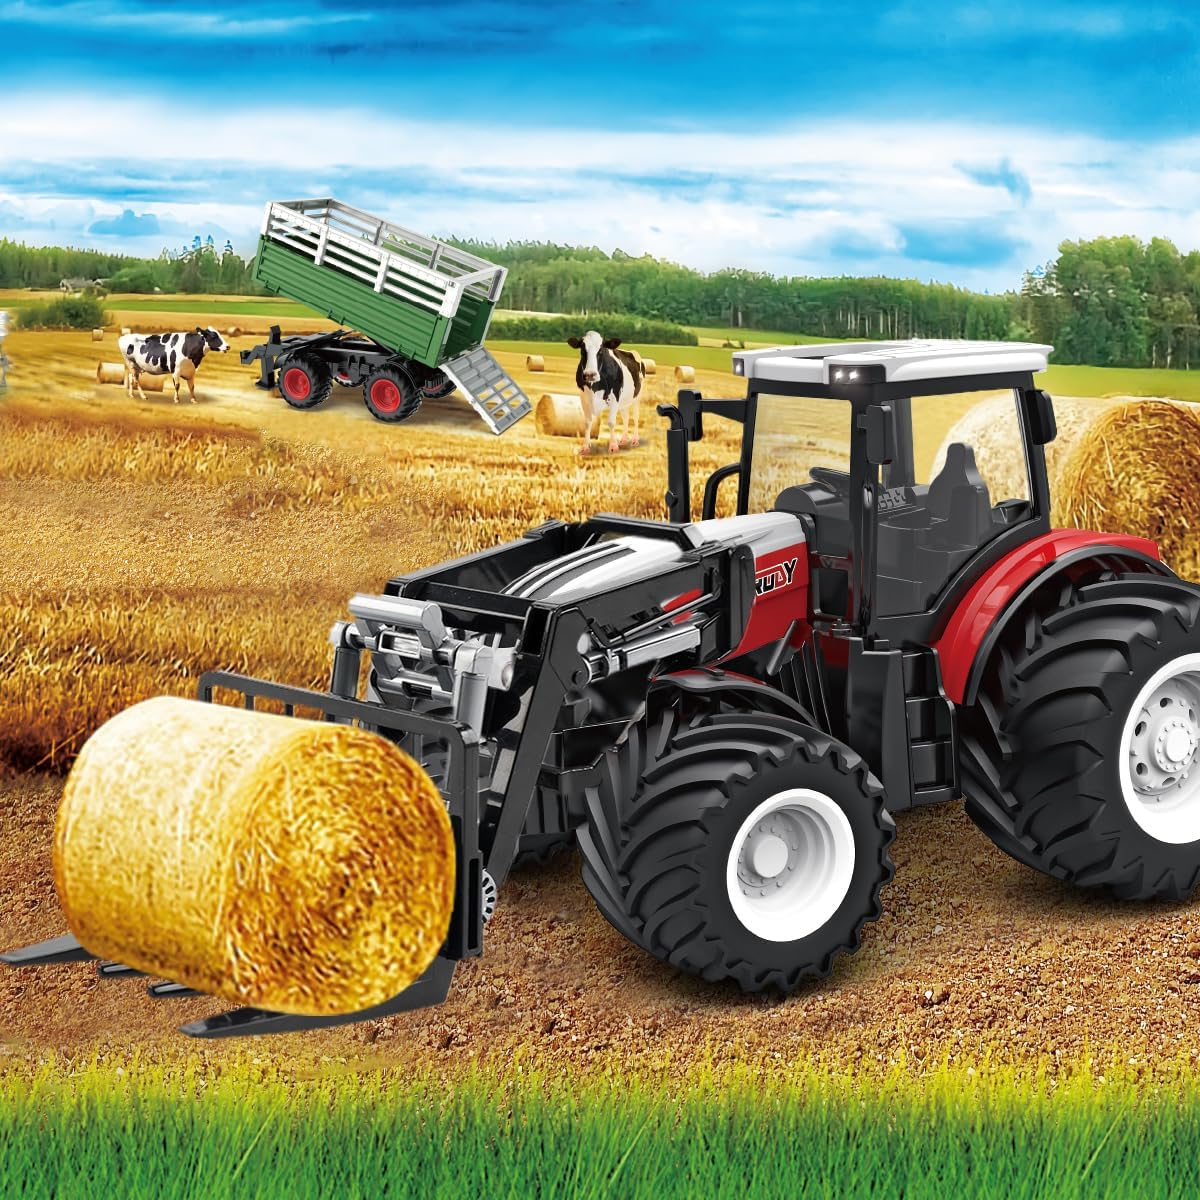 fisca Remote Control Tractor Toy: An Exciting RC Farm Tractor Set for Endless Fun